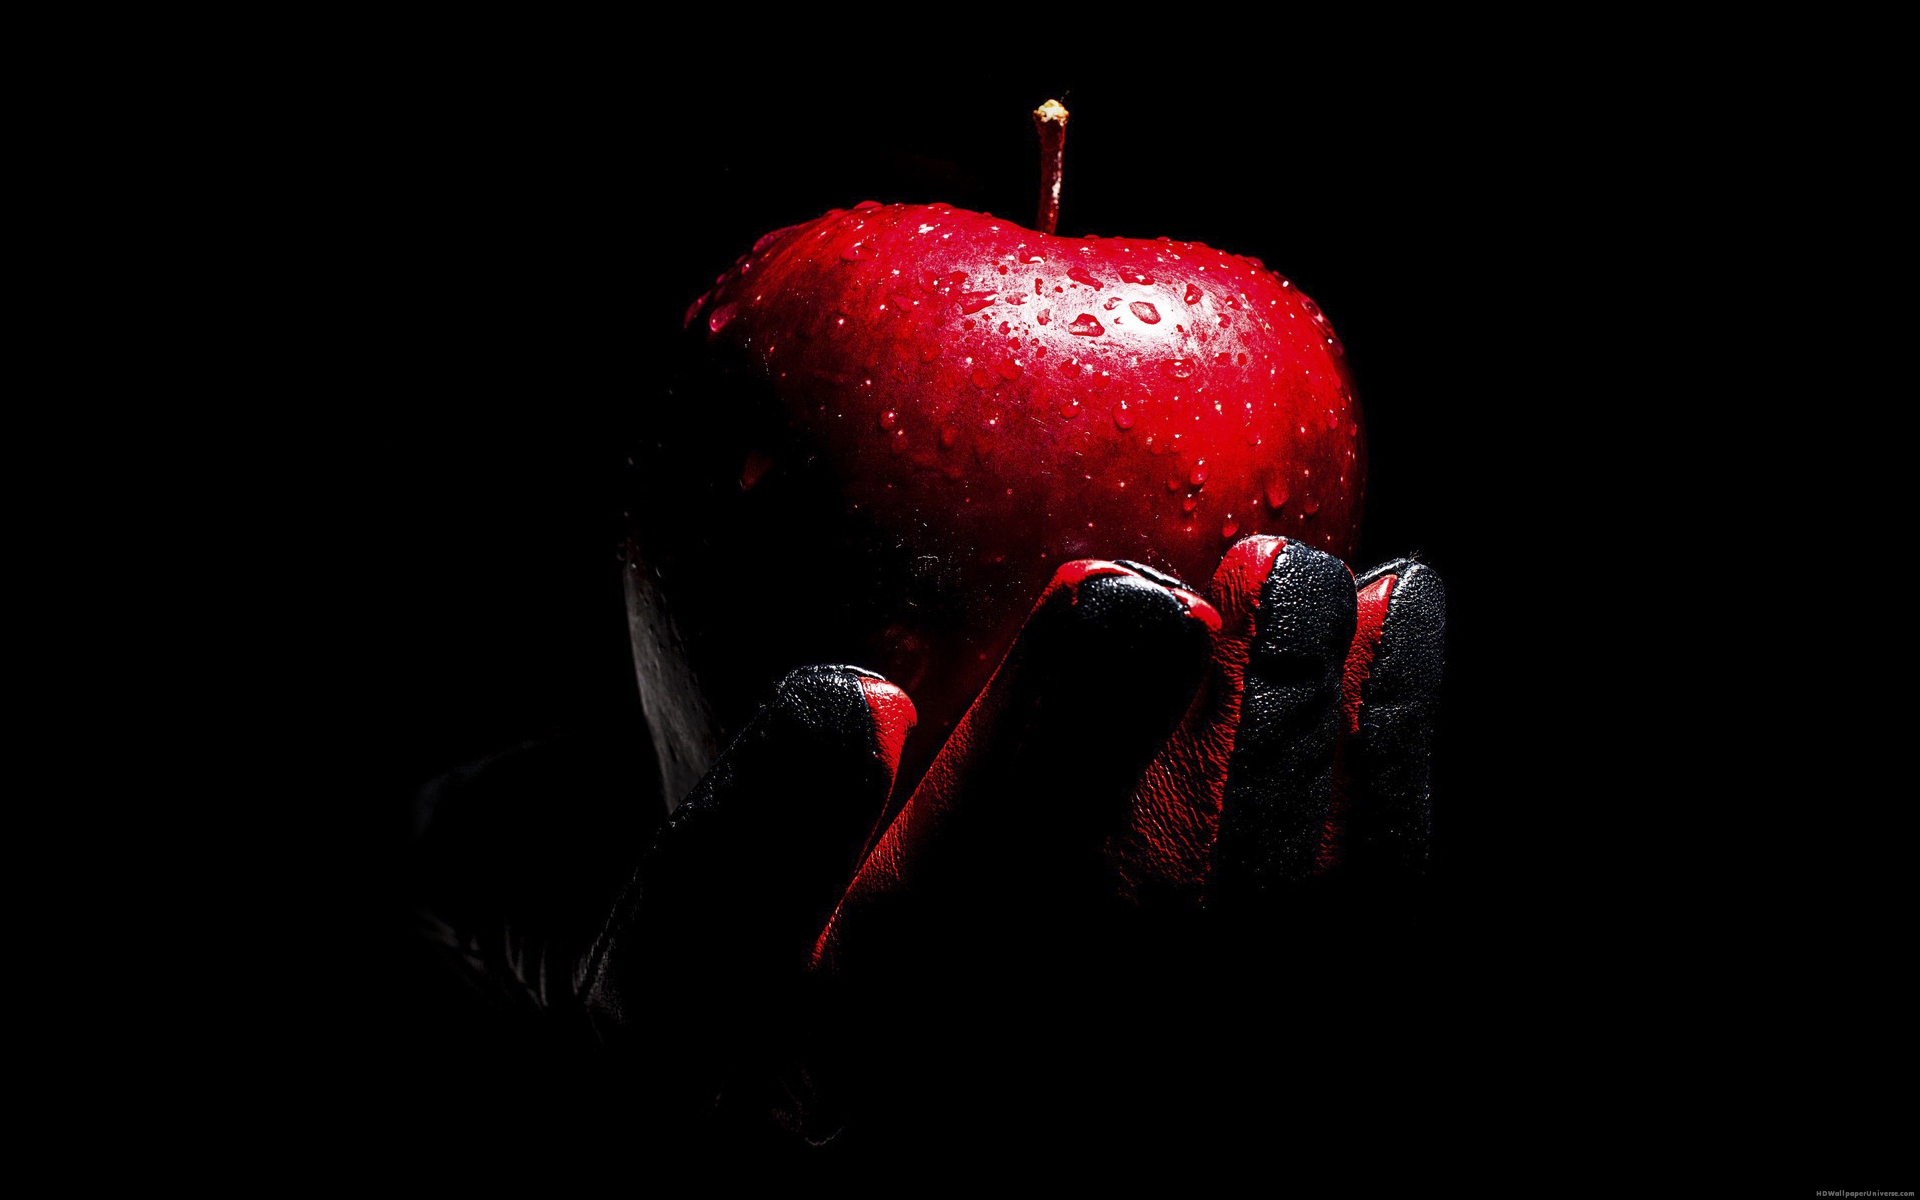 Red Apple Black Leather Glove HD Wallpaper